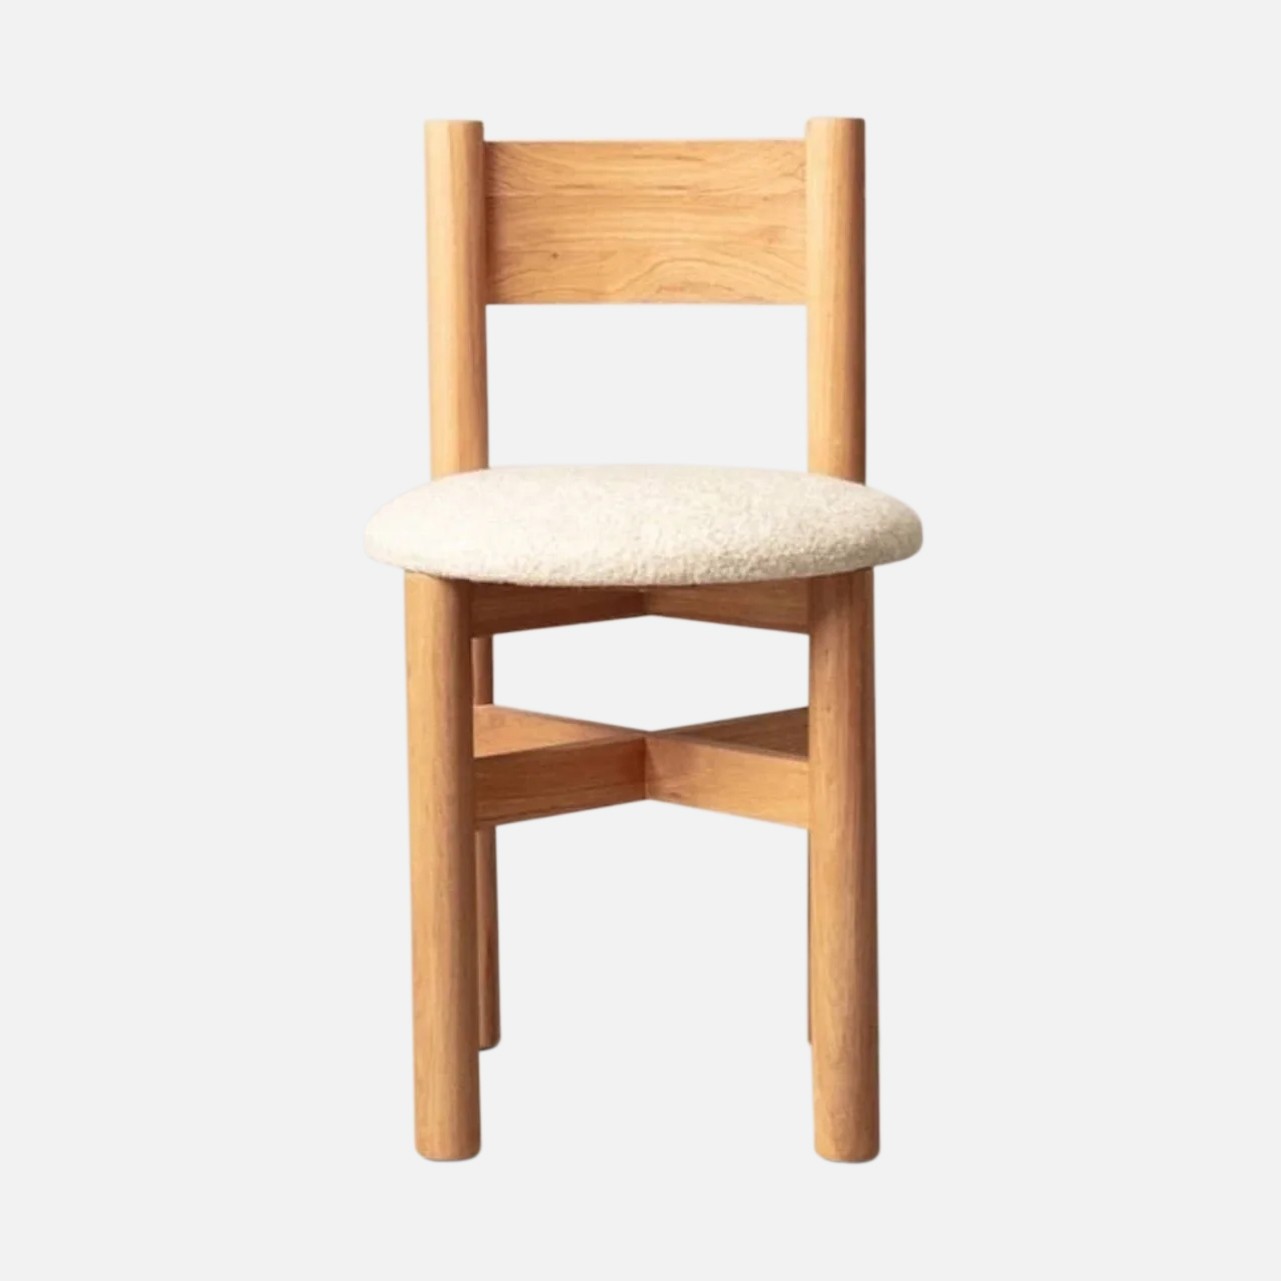 a wooden chair with a white cushion on it